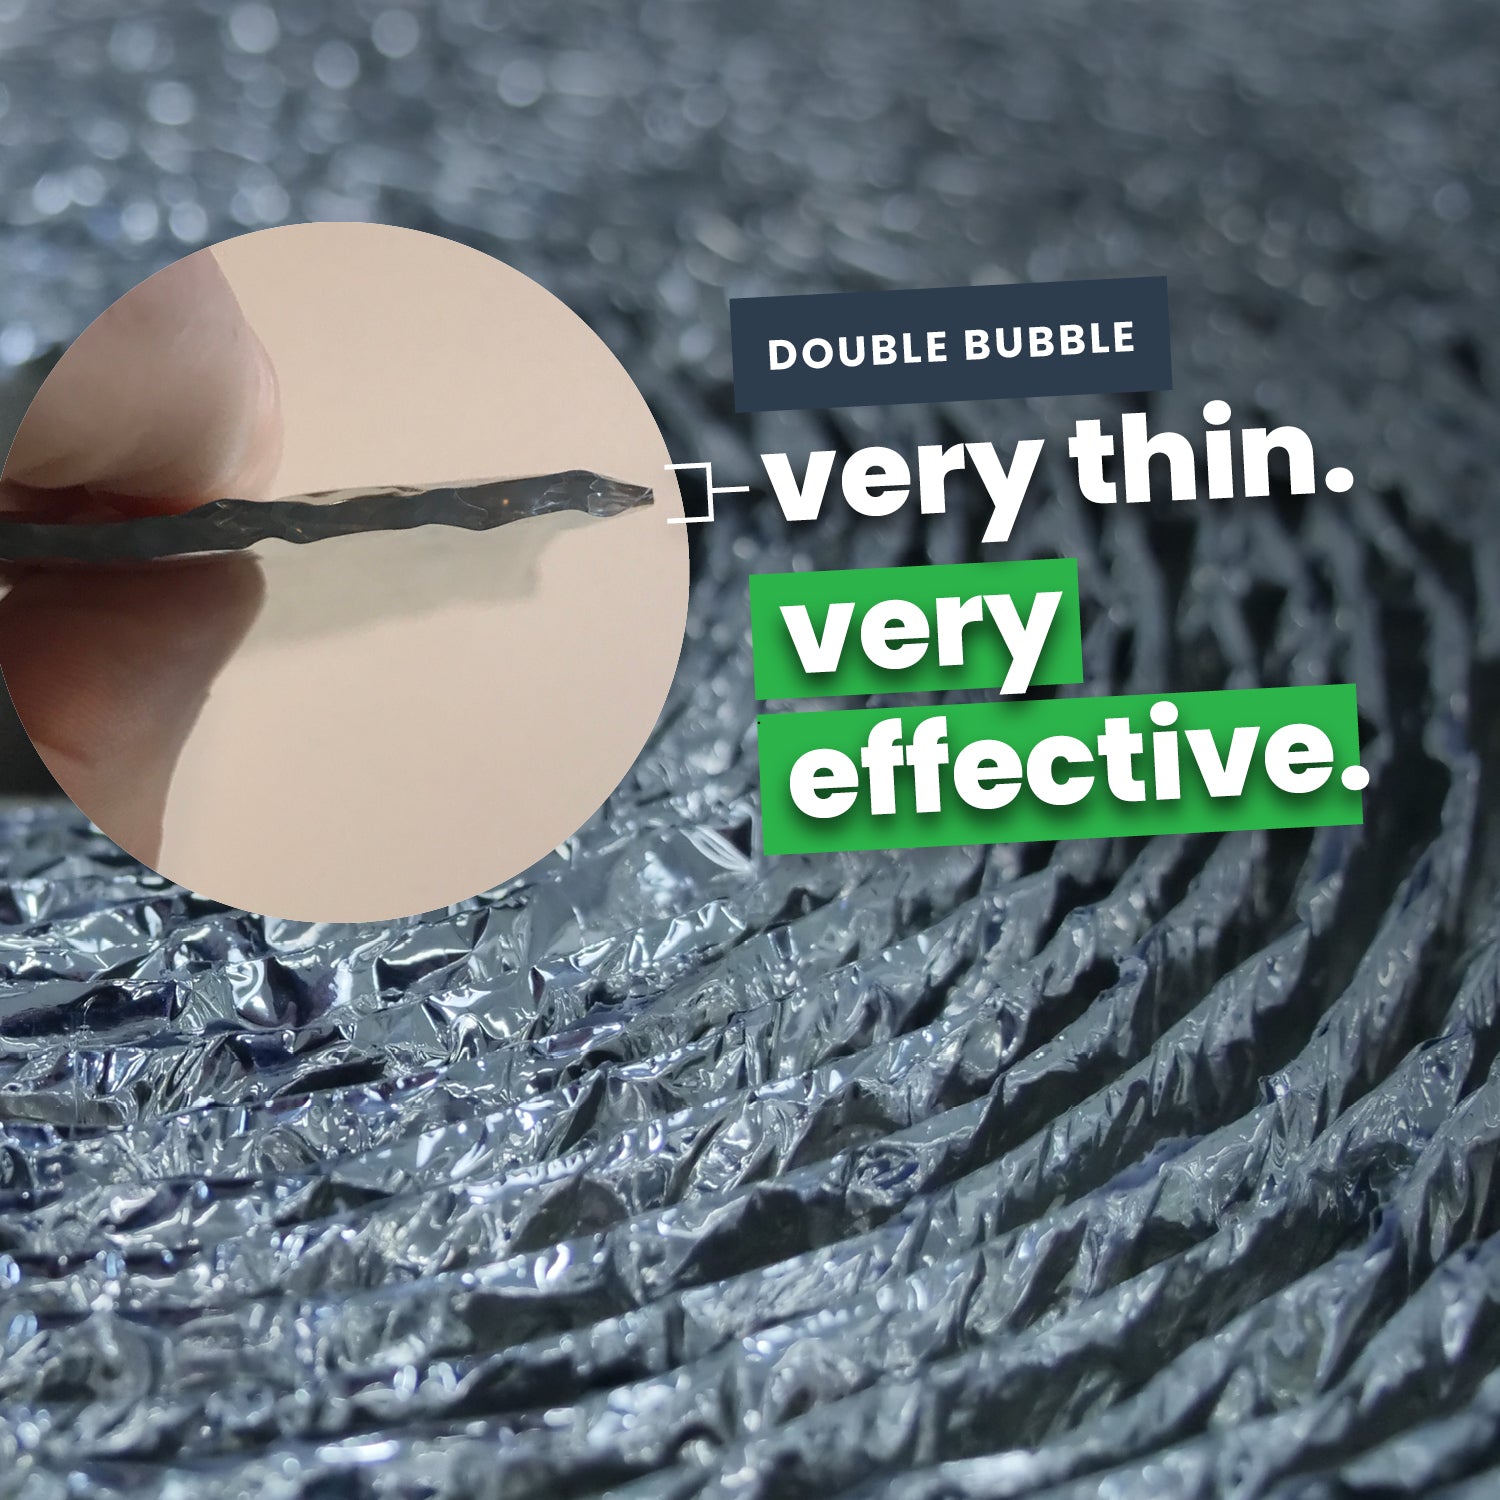 double bubble is very thin and very effective